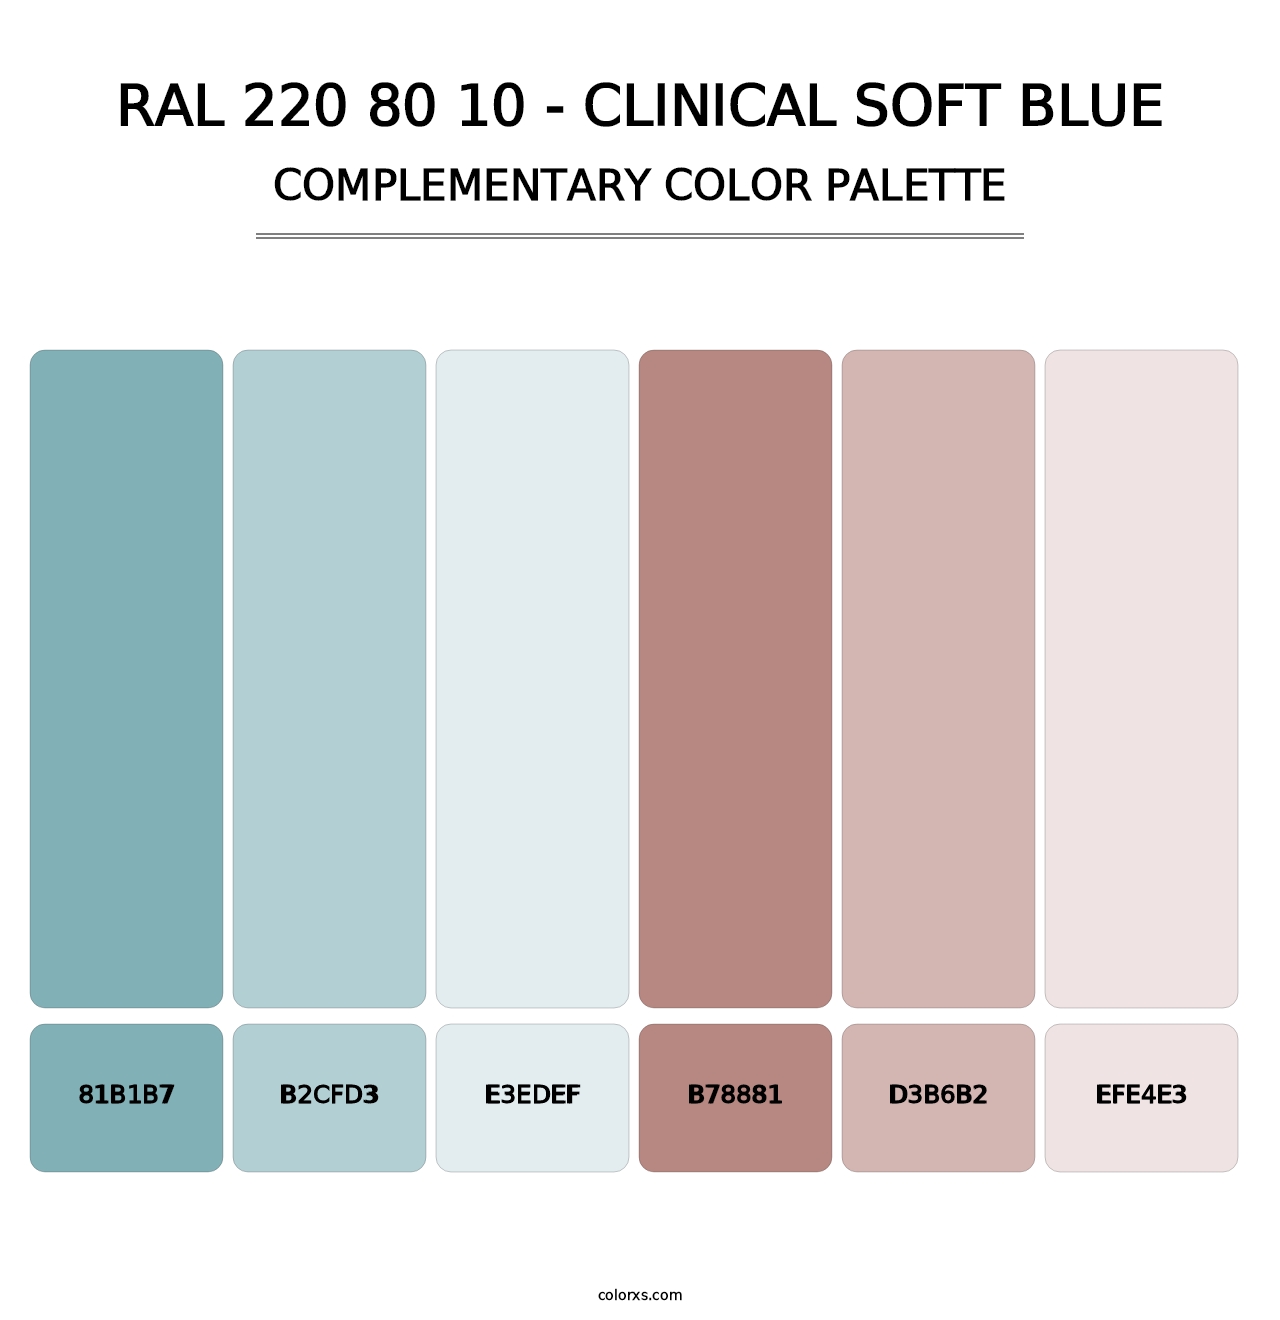 RAL 220 80 10 - Clinical Soft Blue - Complementary Color Palette